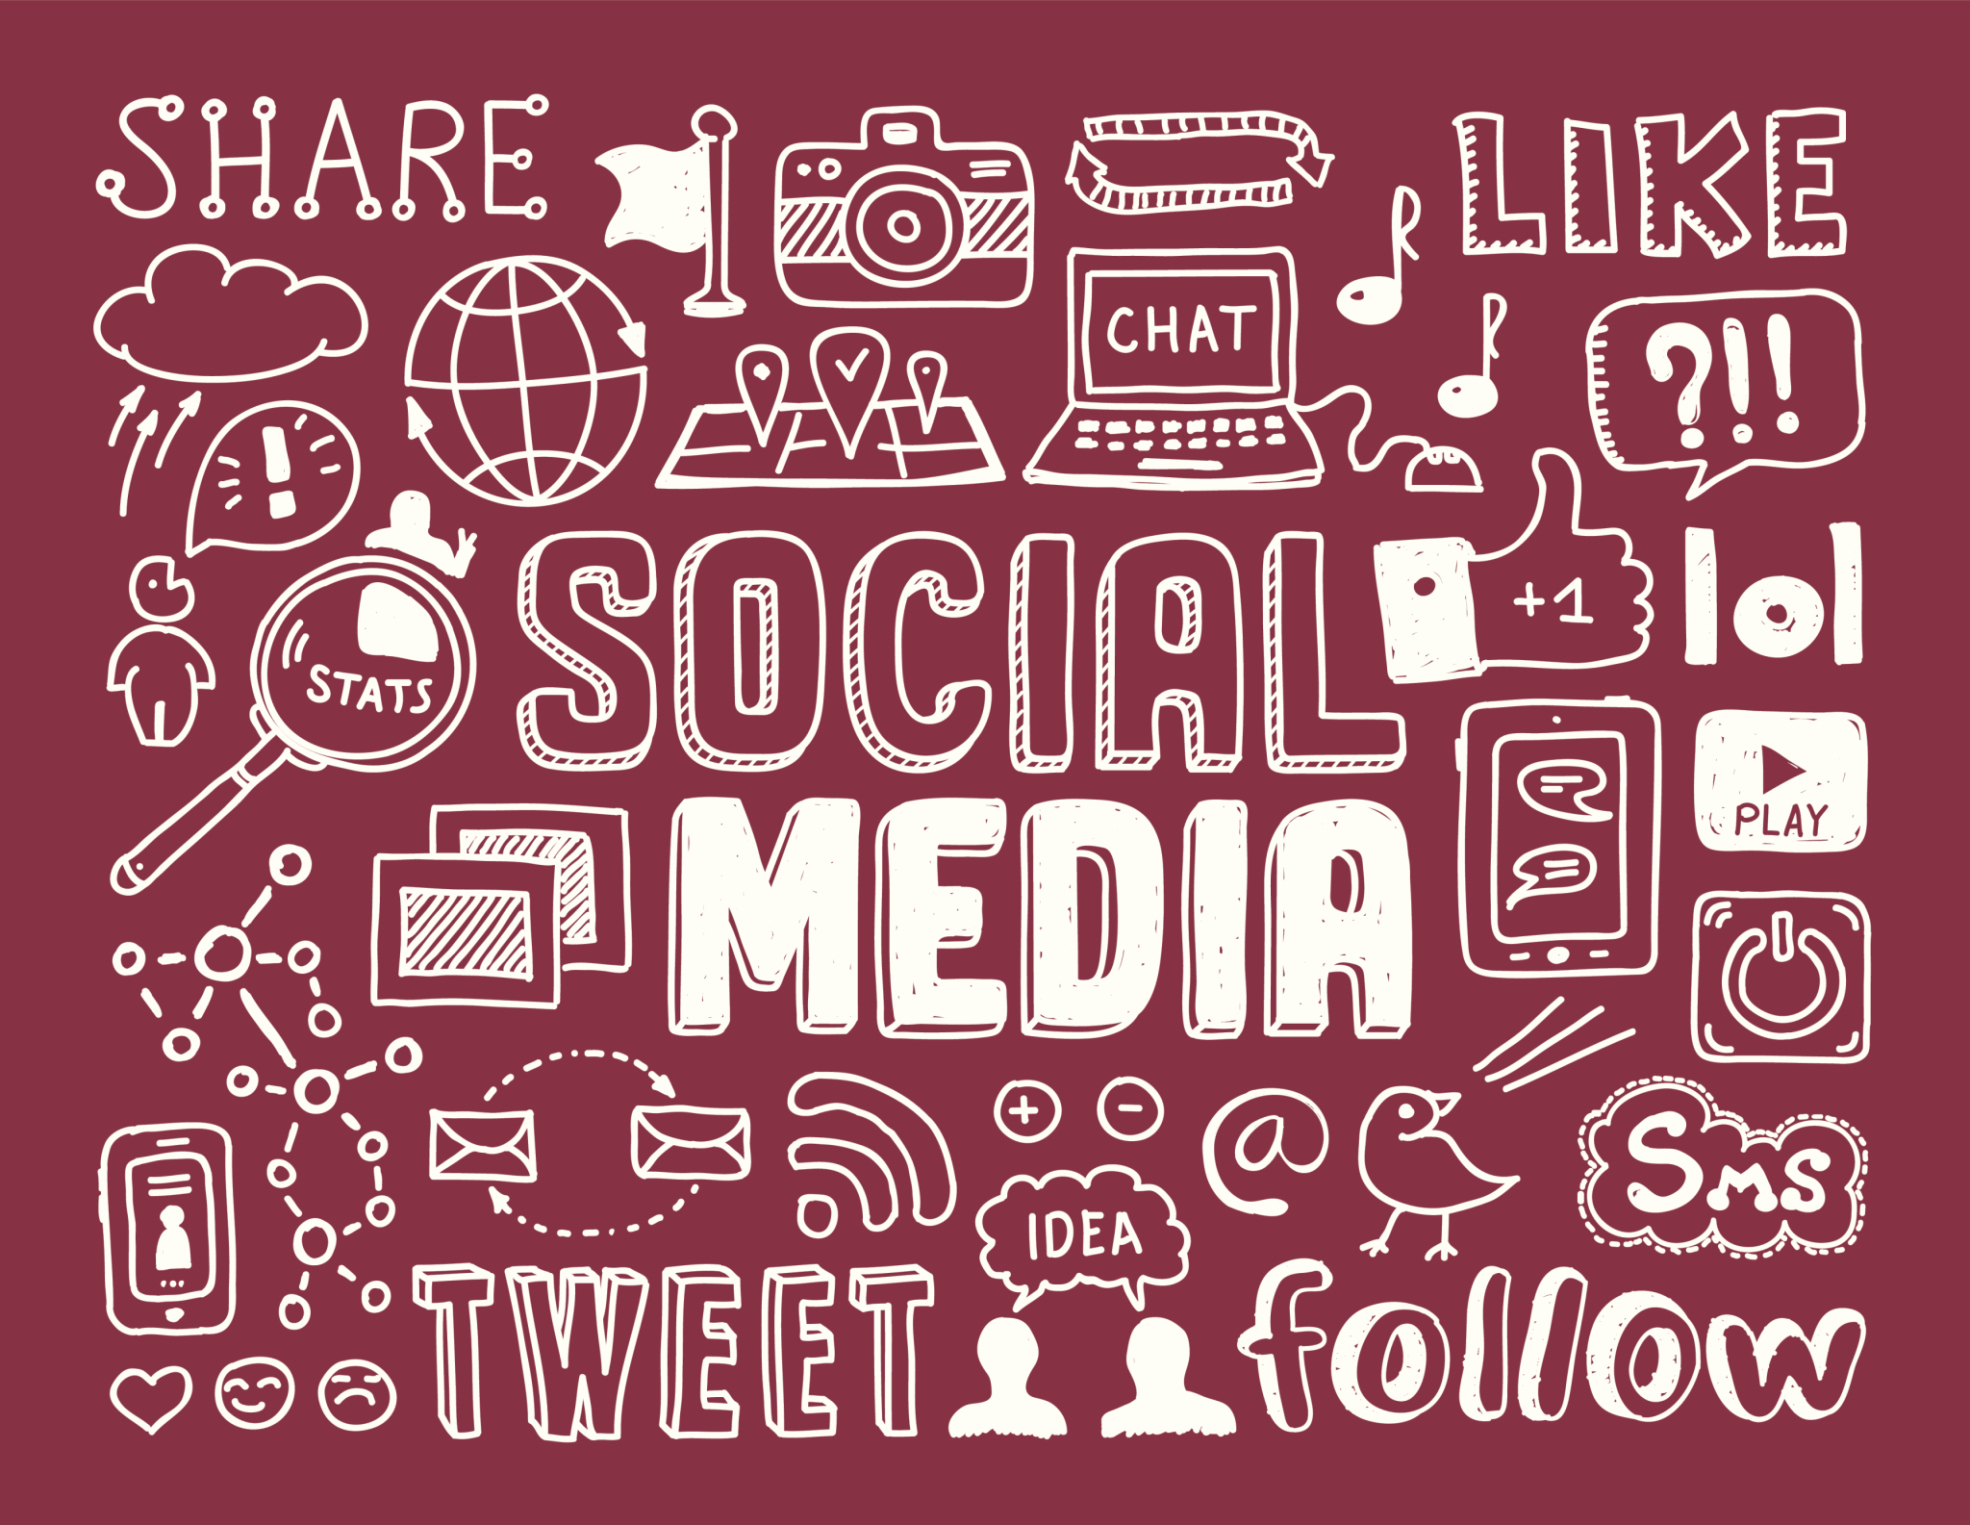 10 social media terms you should know